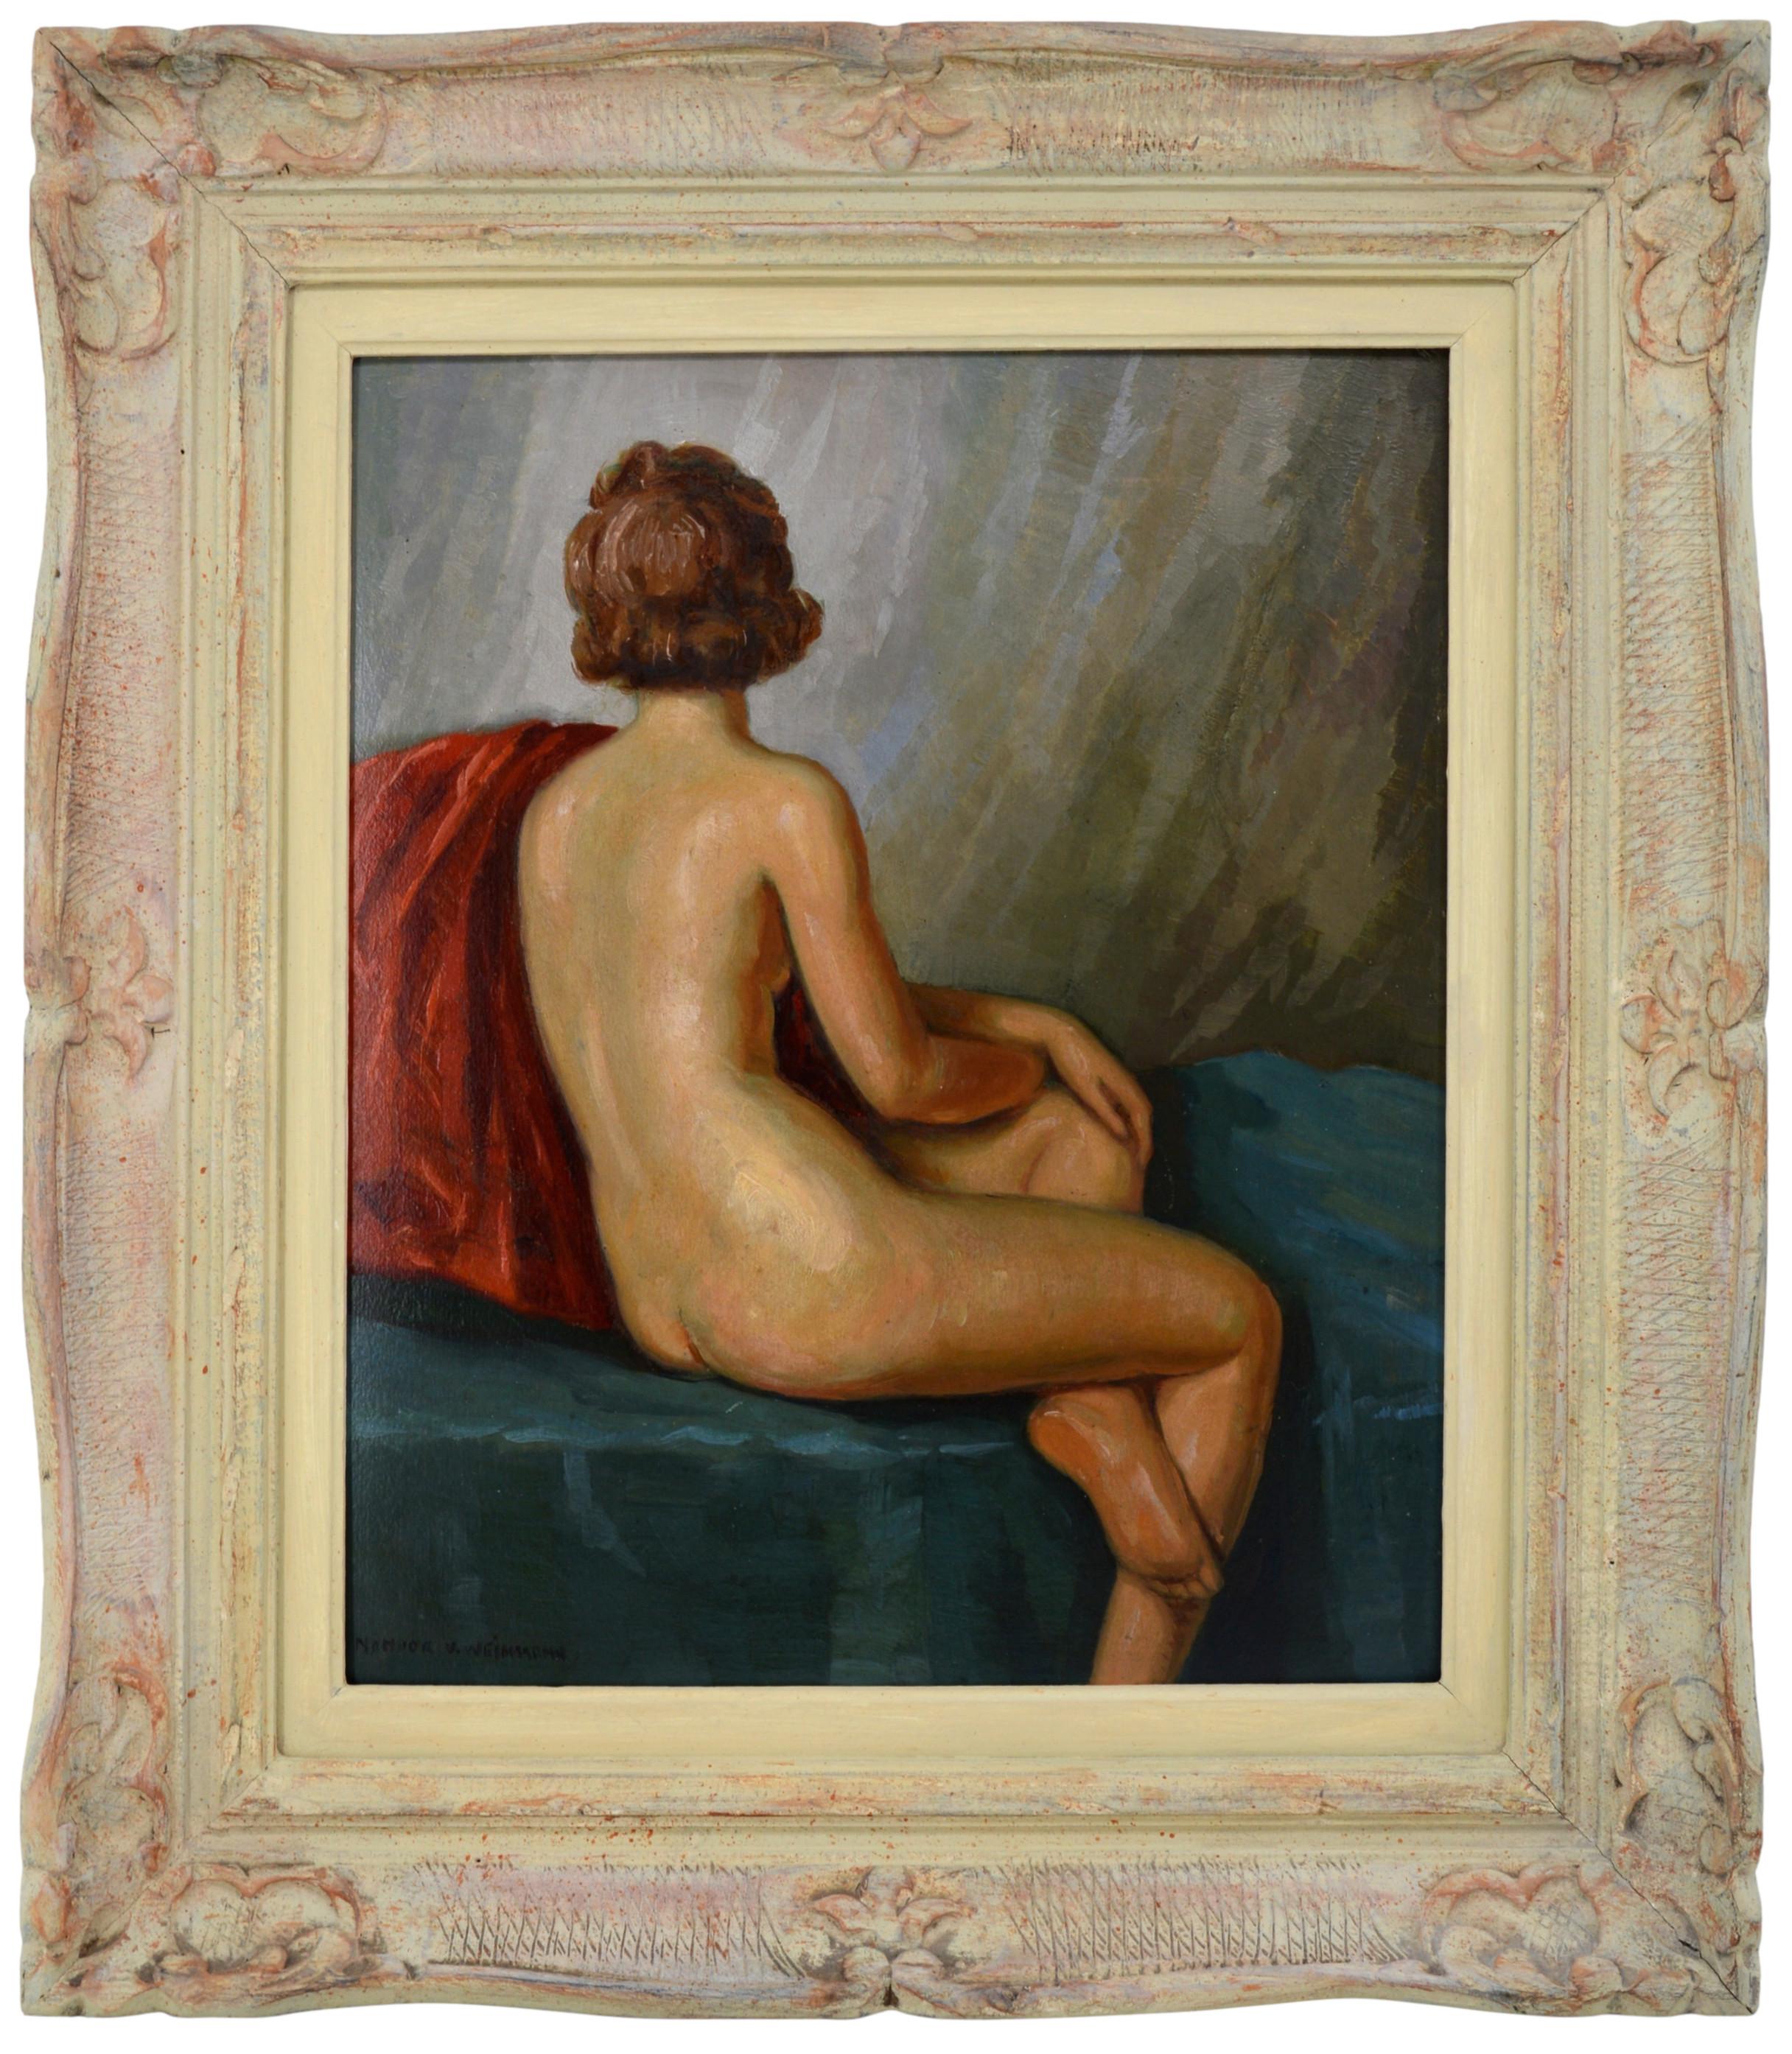 Oil on cardboard by Nandor VAGH WEINMANN (1897-1978), France, 1930s. Naked back. With frame: 64x56 cm - 25.2x22 inches ; without frame: 46x38cm - 18.1x15 inches. 8F format. Signed "Nandor V. Weinmann" lower left. In its Montparnasse frame. Very good